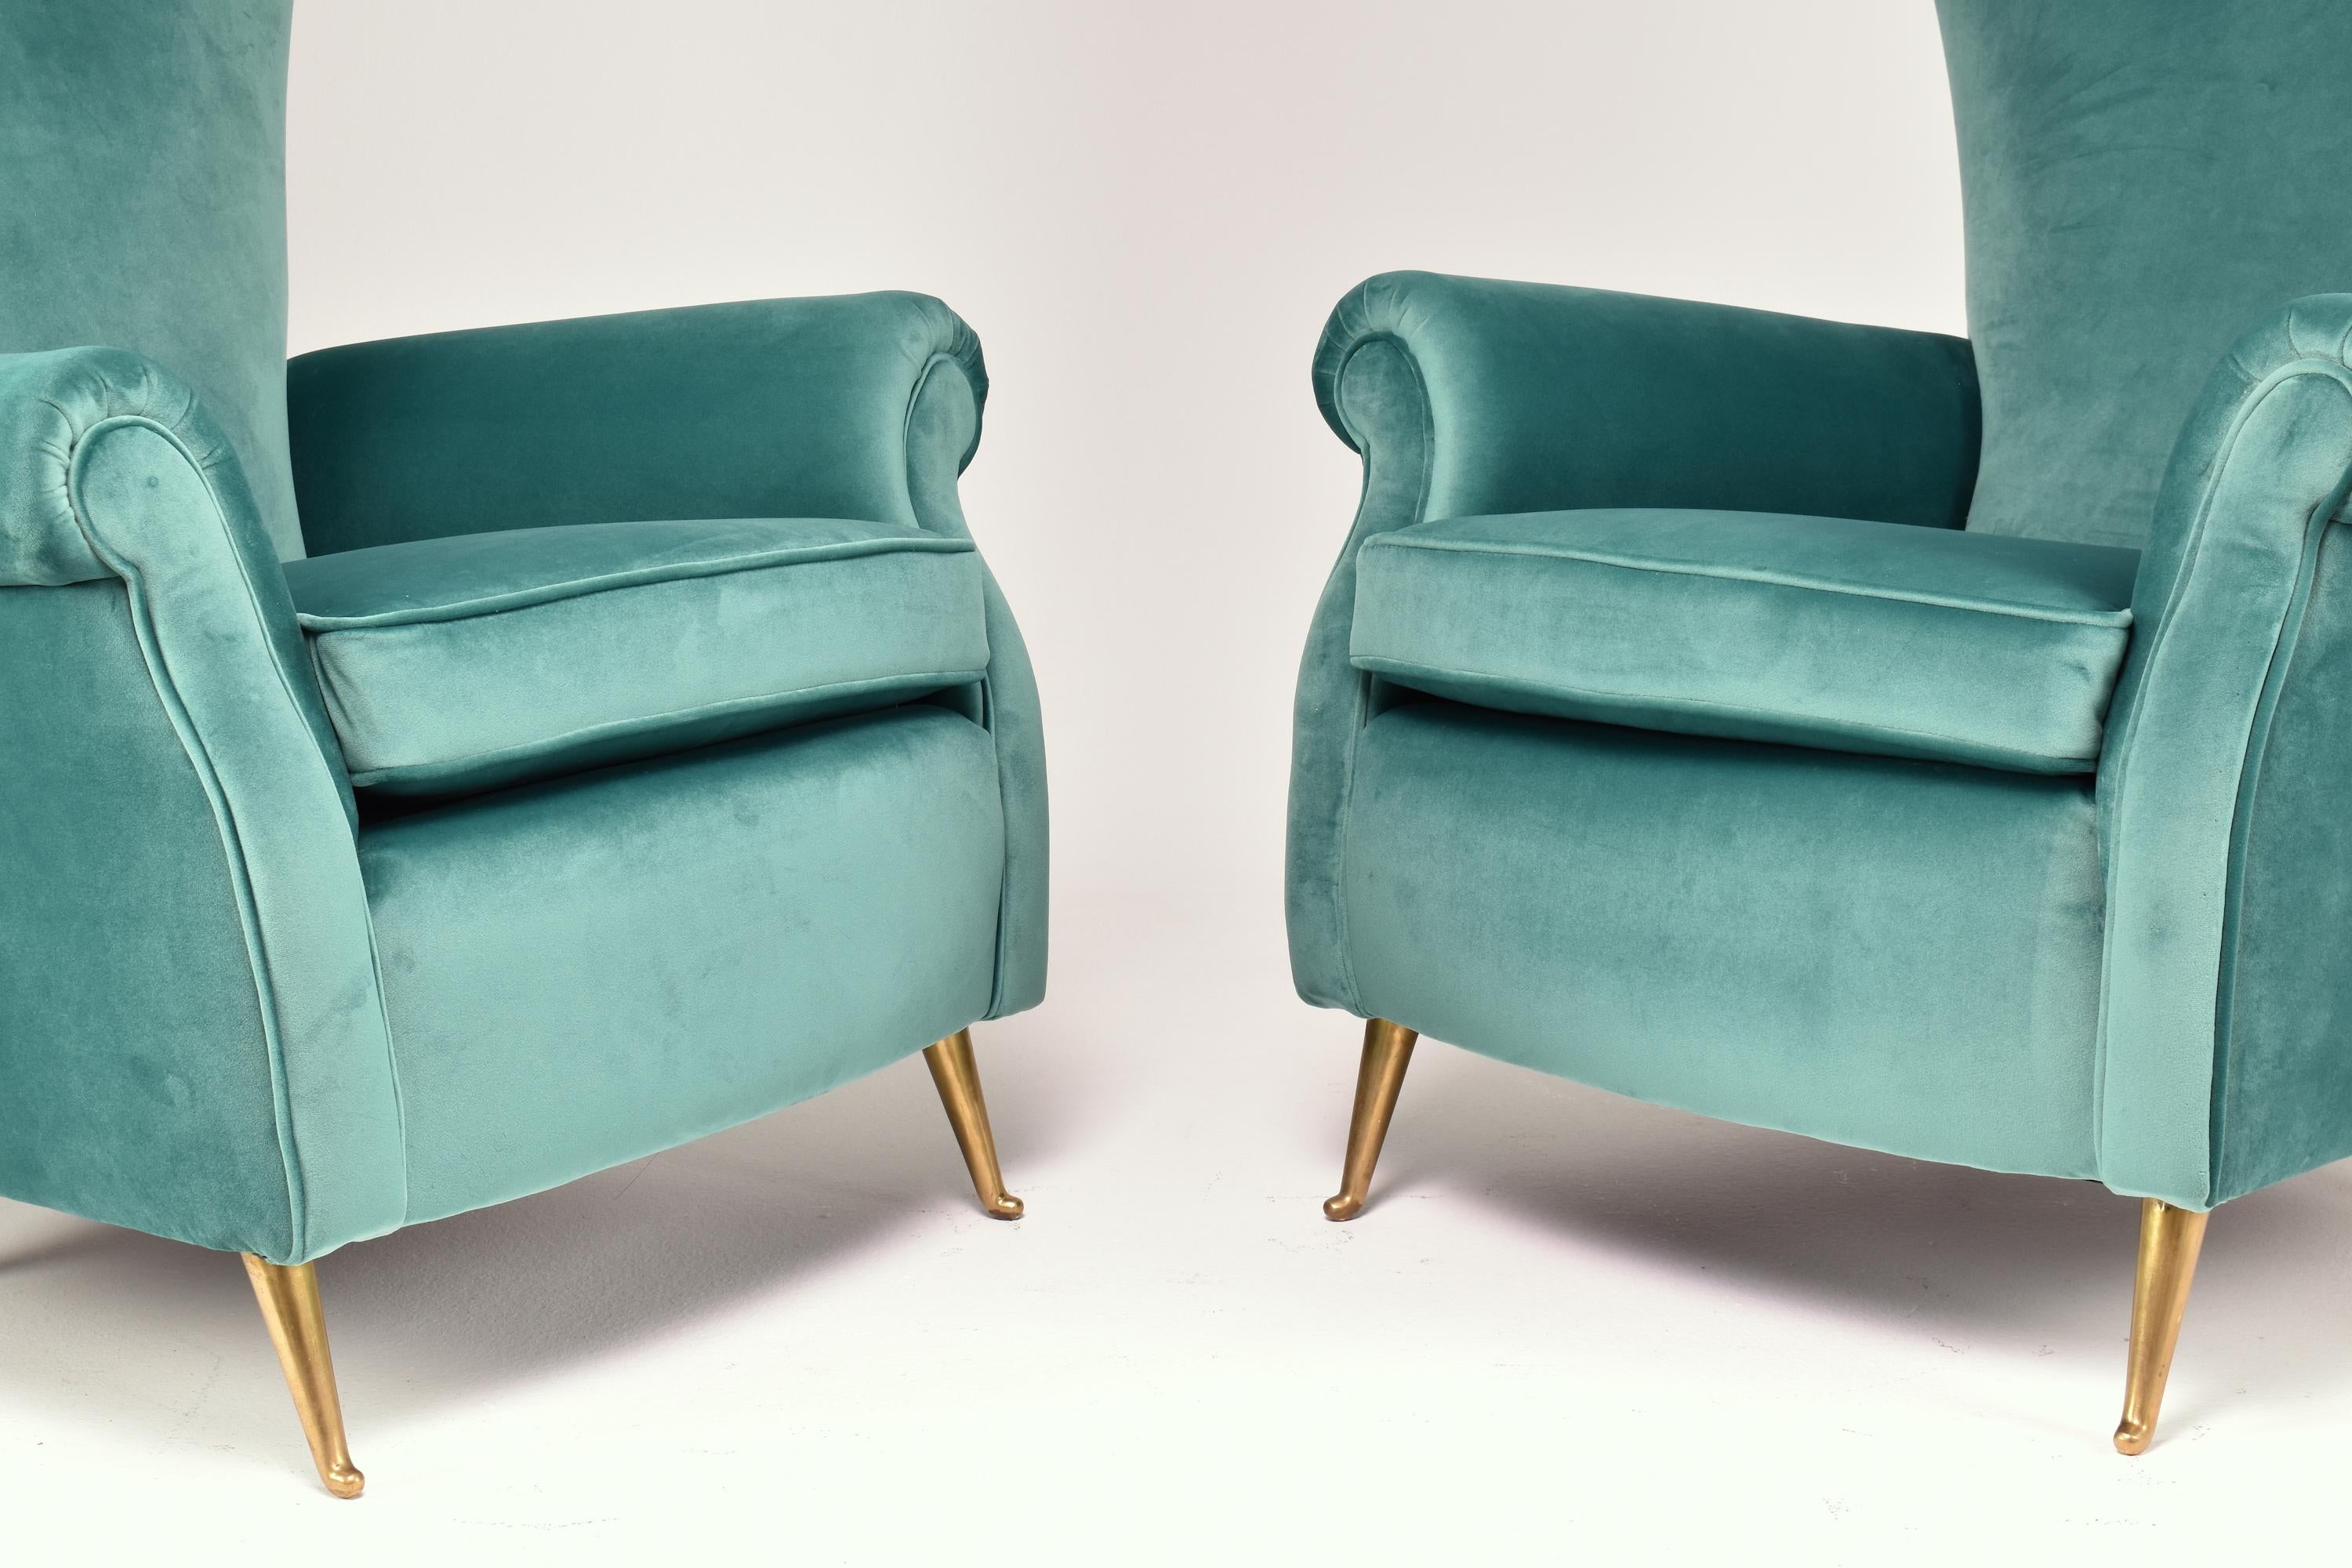 20th Century Italian Midcentury Armchairs by ISA Bergamo, Set of Two, 1950s For Sale